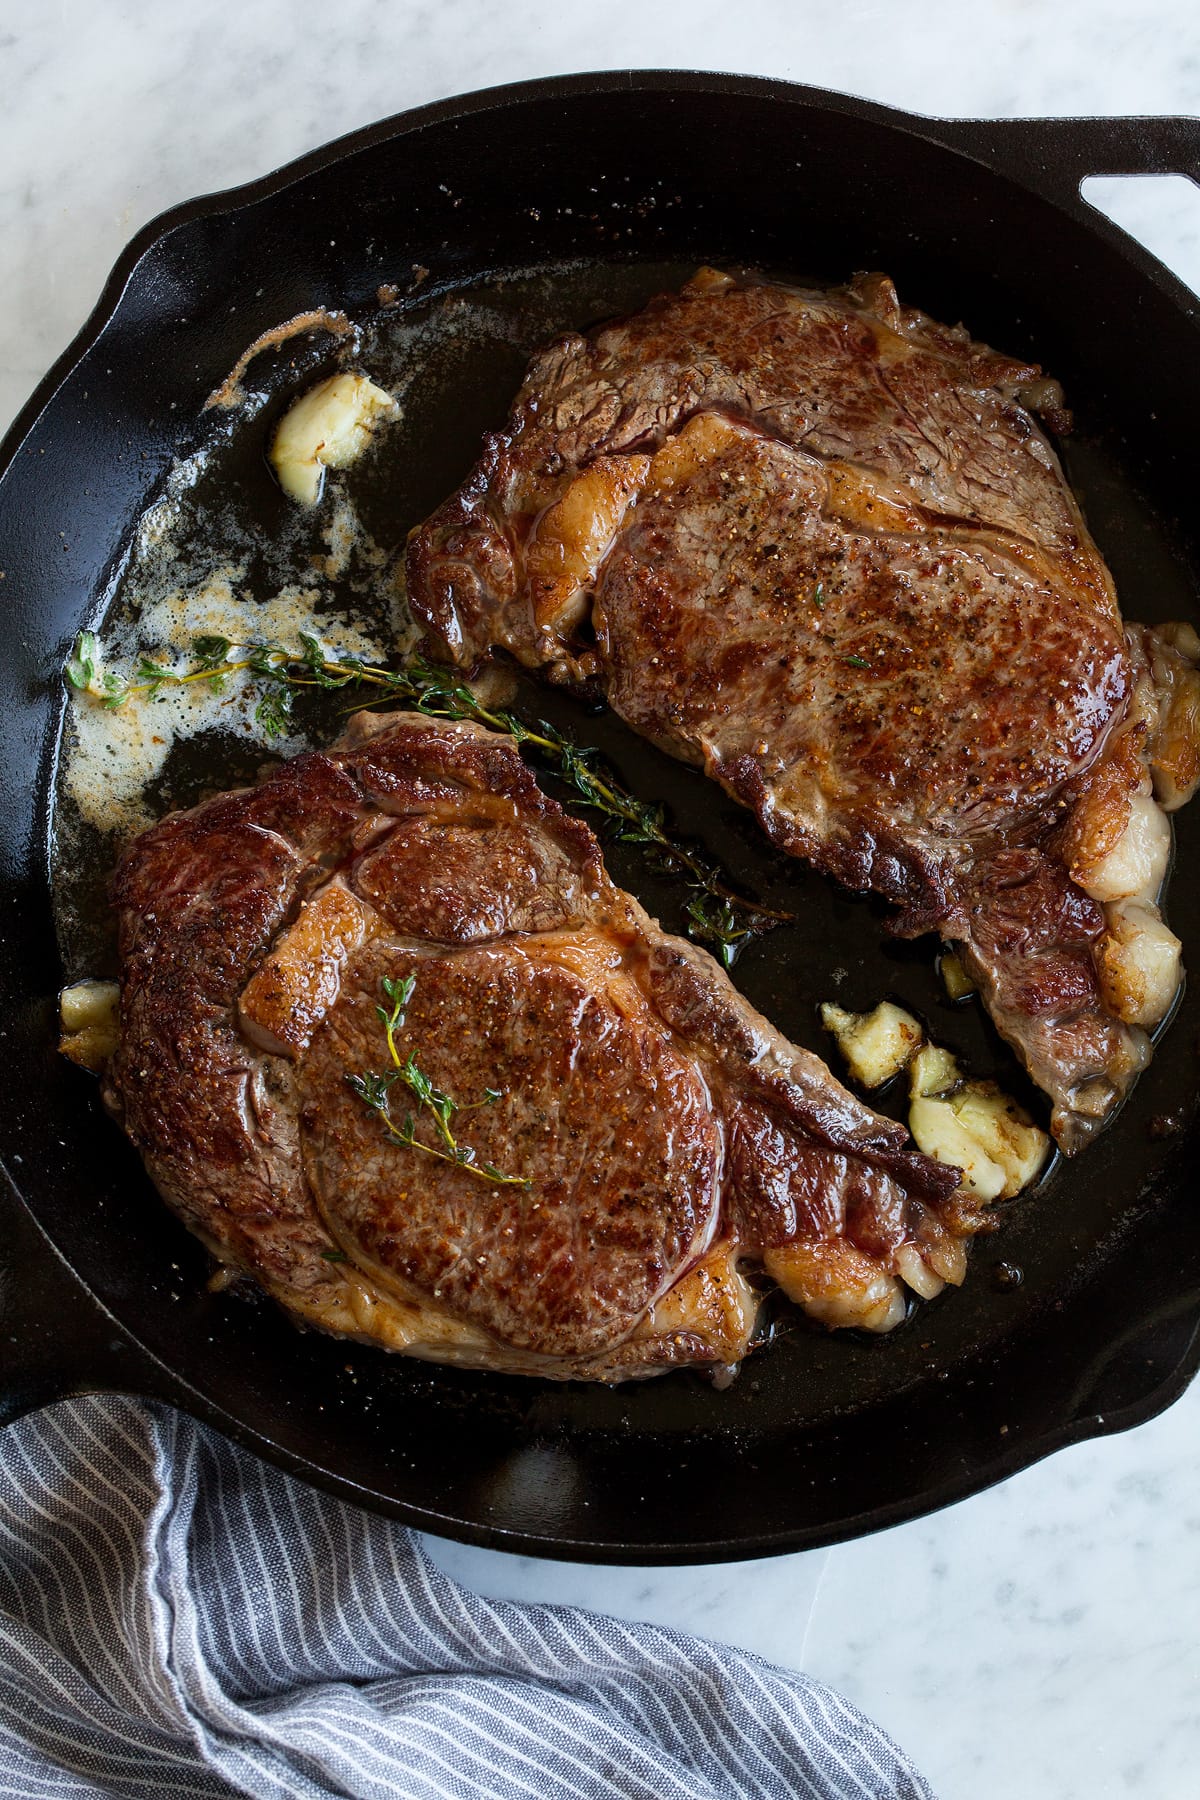 How to cook a steak using a cast iron skillet How To Cook Steak Pan Seared With Garlic Butter Cooking Classy